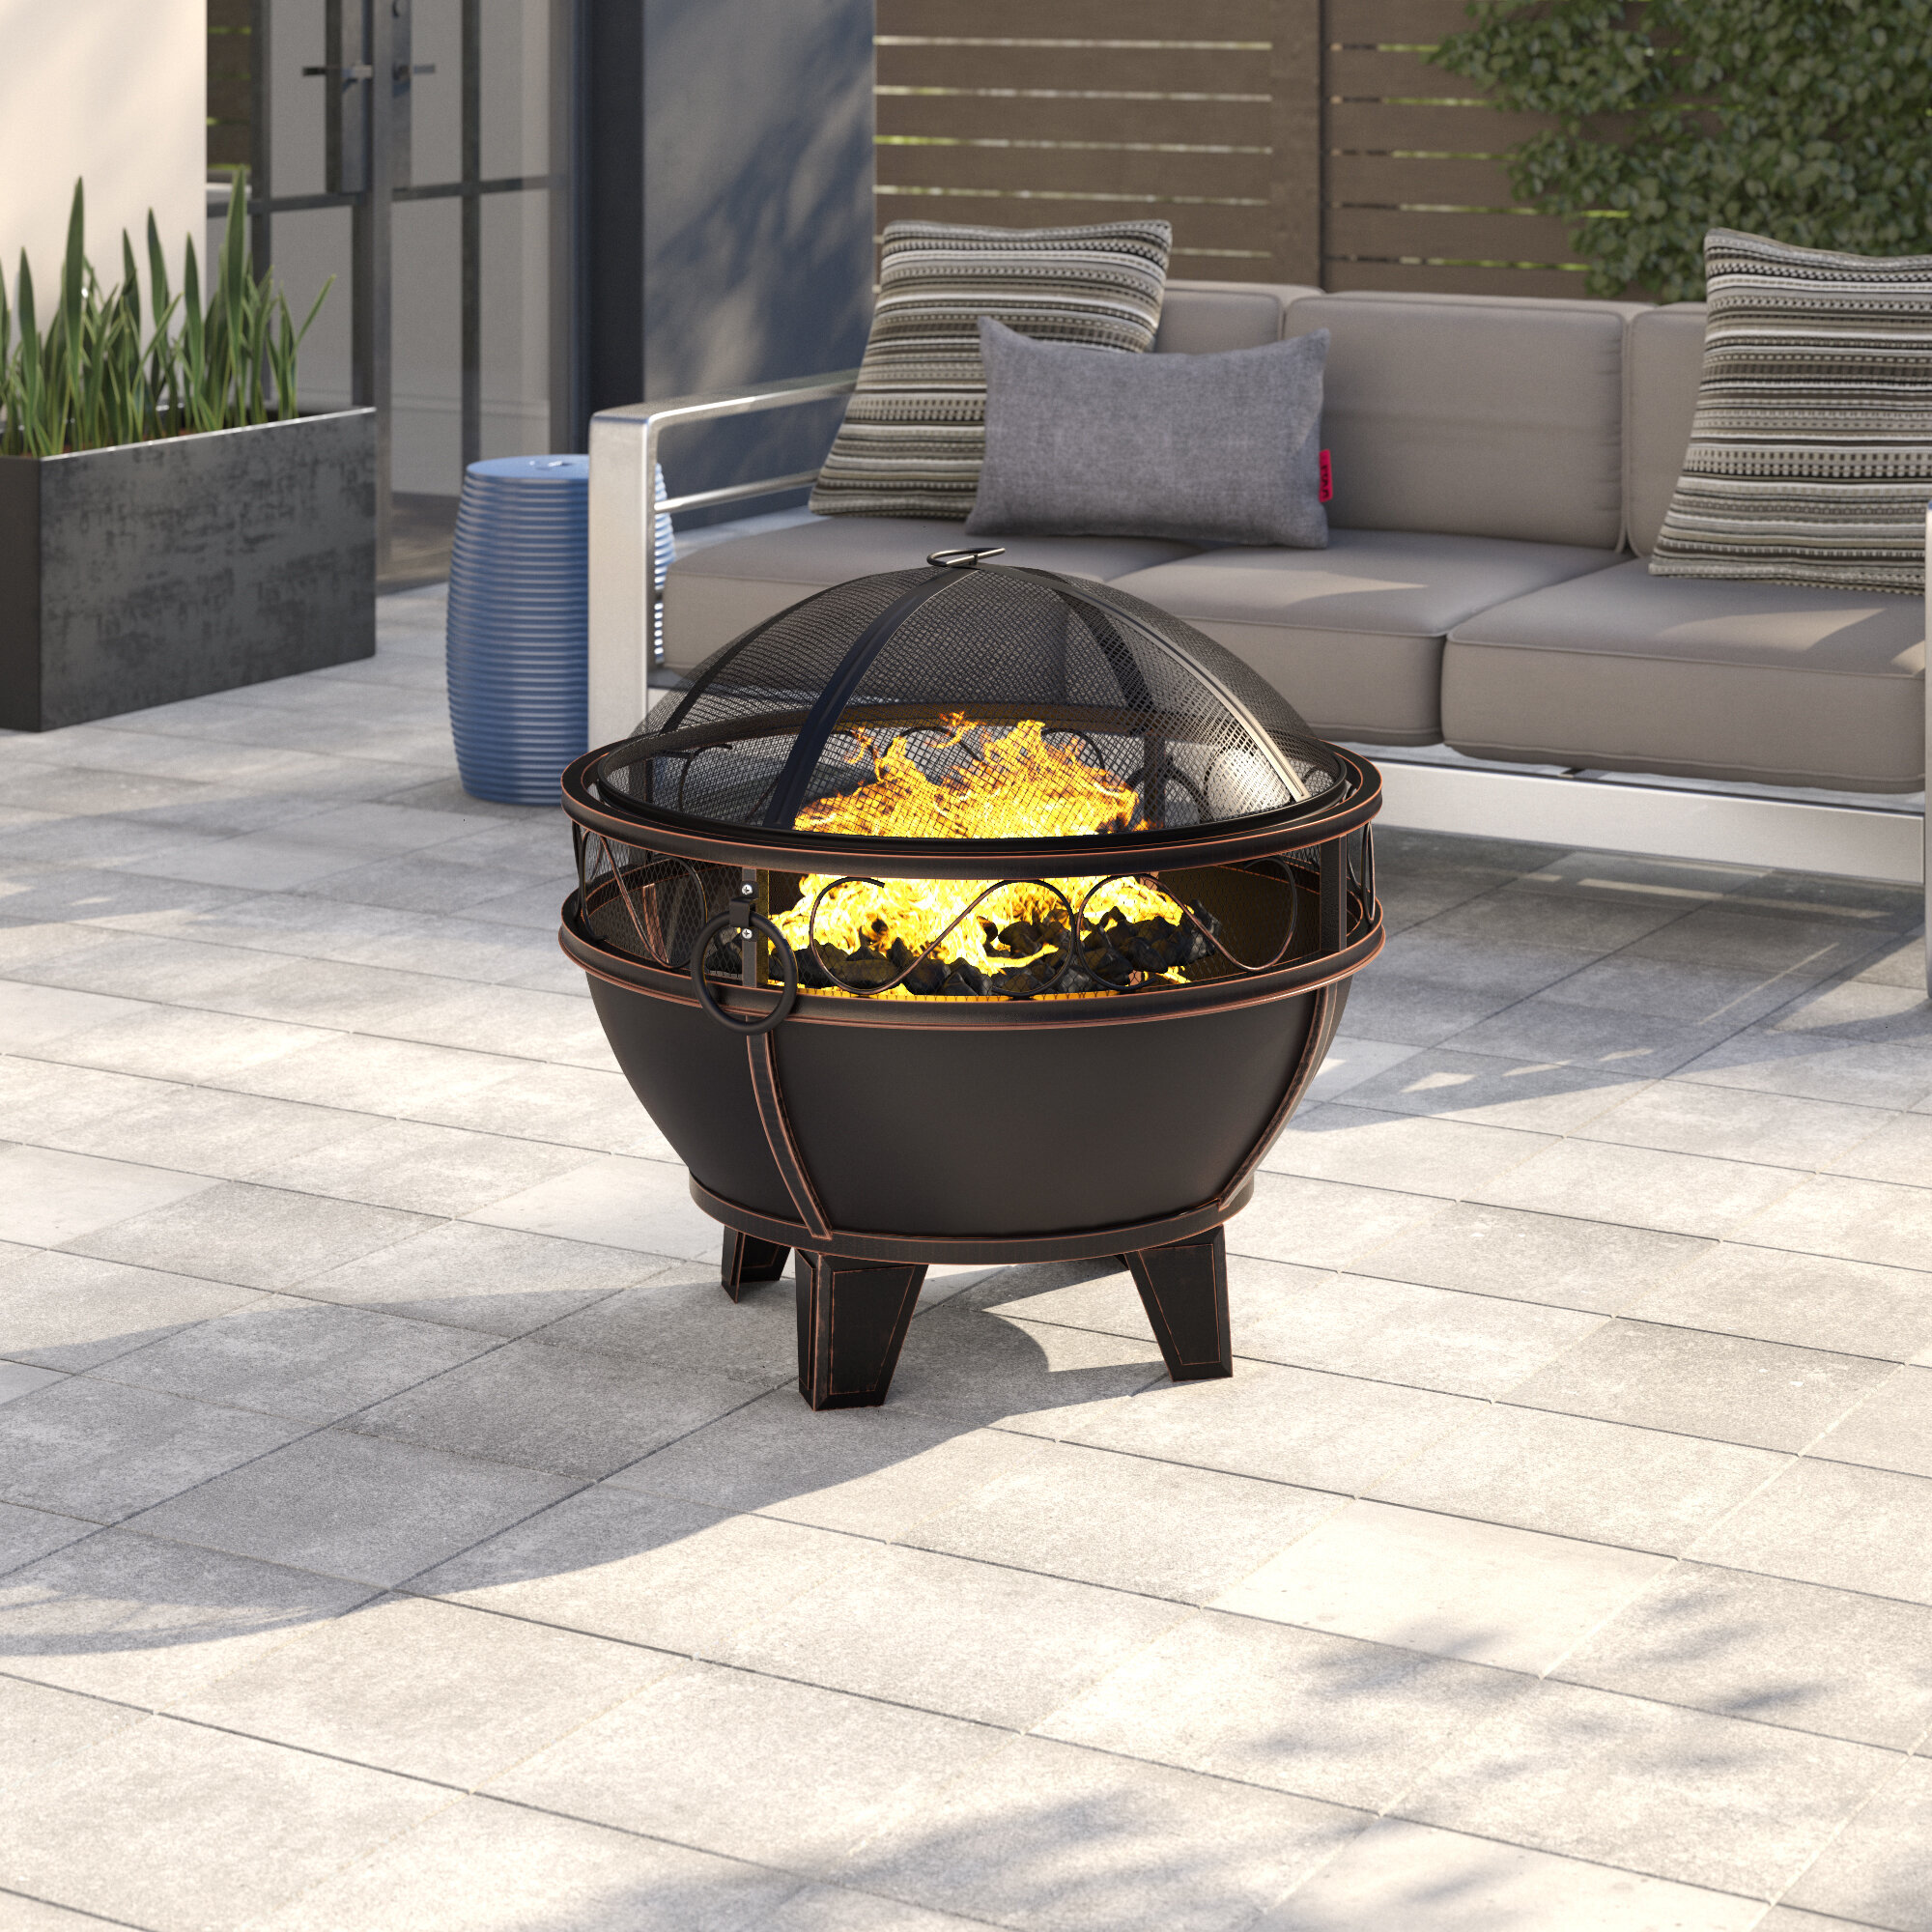 Wayfair | Bronze Fire Pit Fire Pits You'll Love in 2022